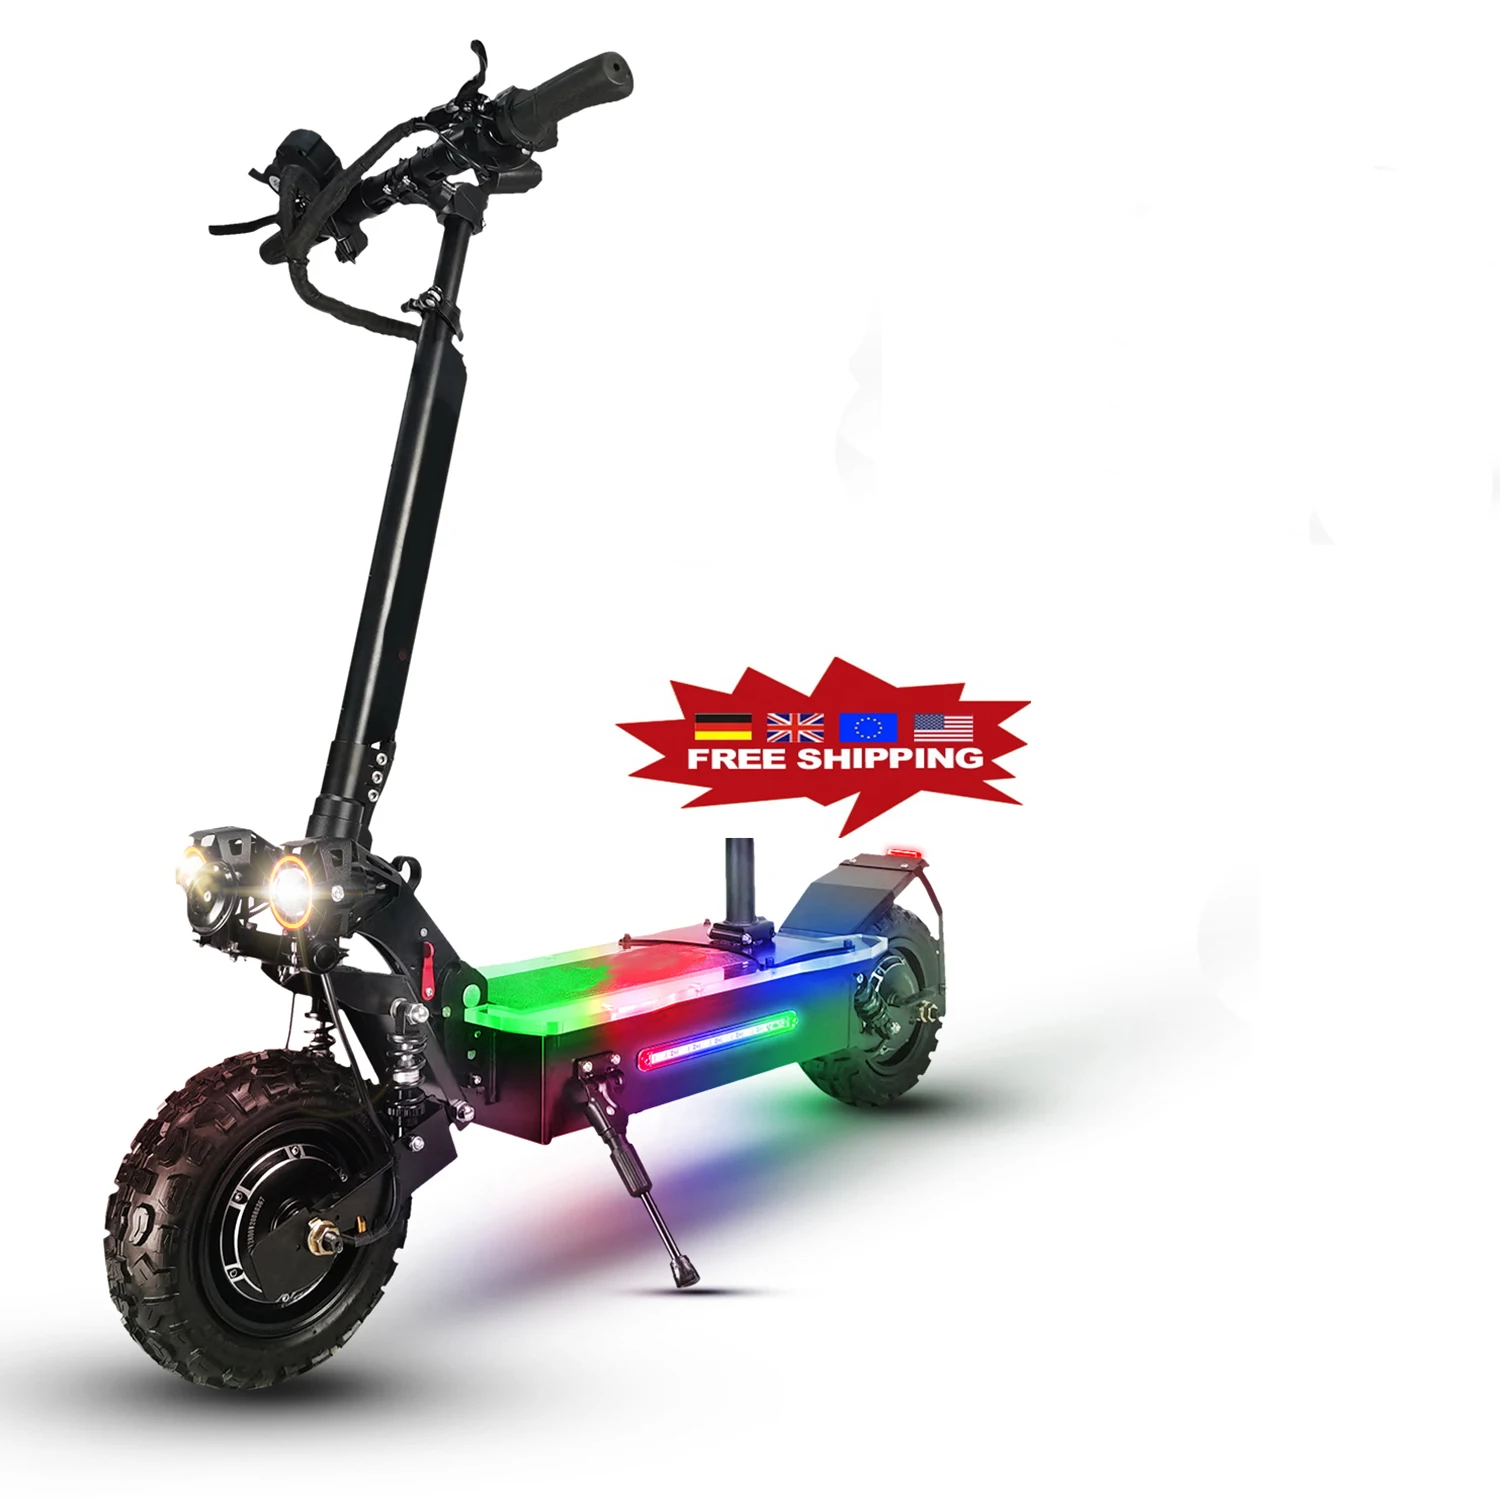 

DDP EU USA Warehouse 60v 27ah 5600w Dual Motor 11 Inch Fat Tire Max Speed 80km/h Adult Free Shipping Free Duty Electric Scooter